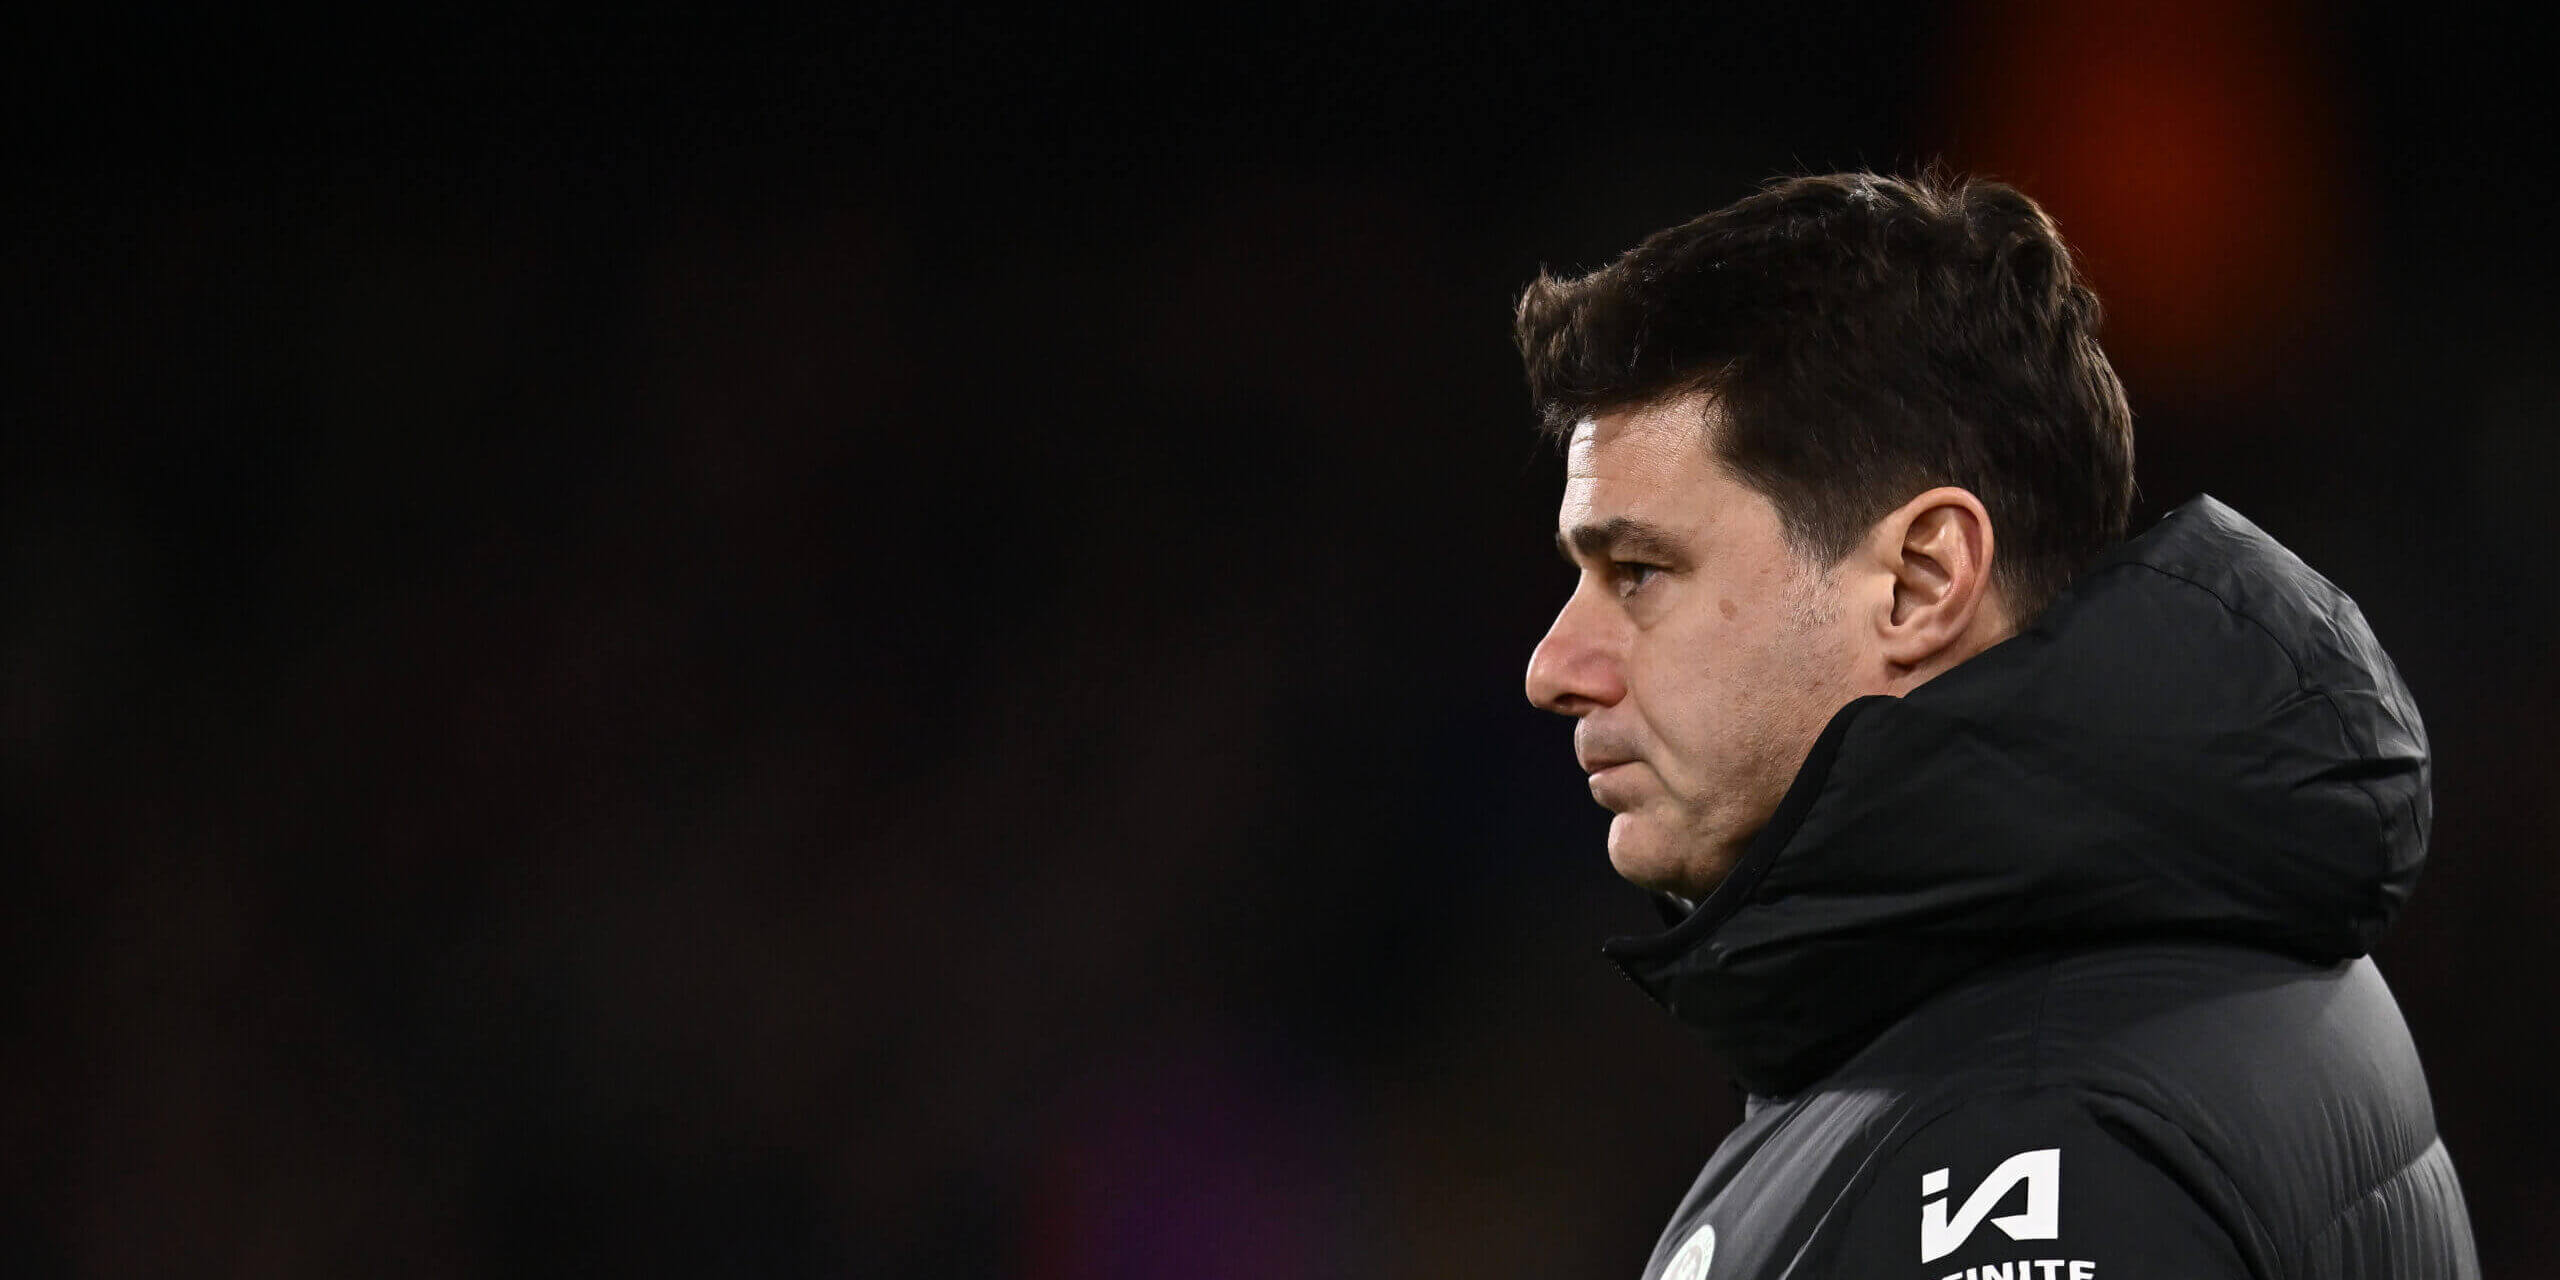 Why Pochettino and Chelsea parted ways: 'Loneliness', injuries and resistance to club structure